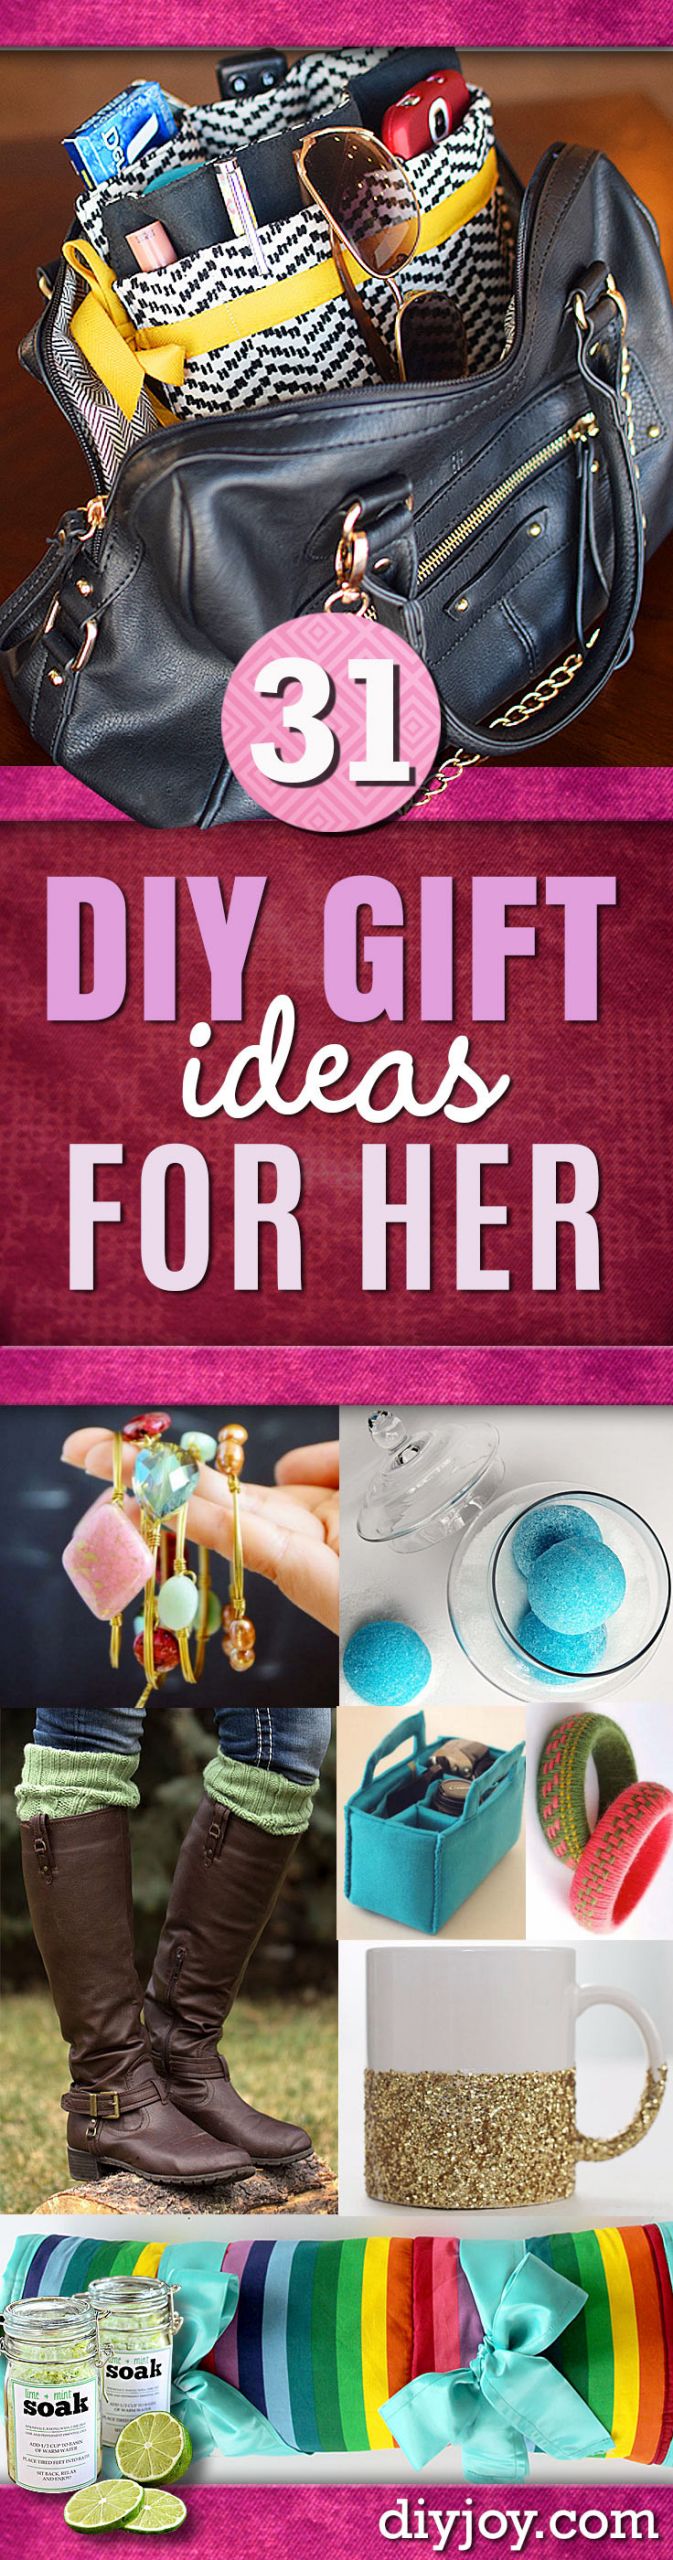 Gift Ideas For Best Girlfriend
 Super Special DIY Gift Ideas for Her